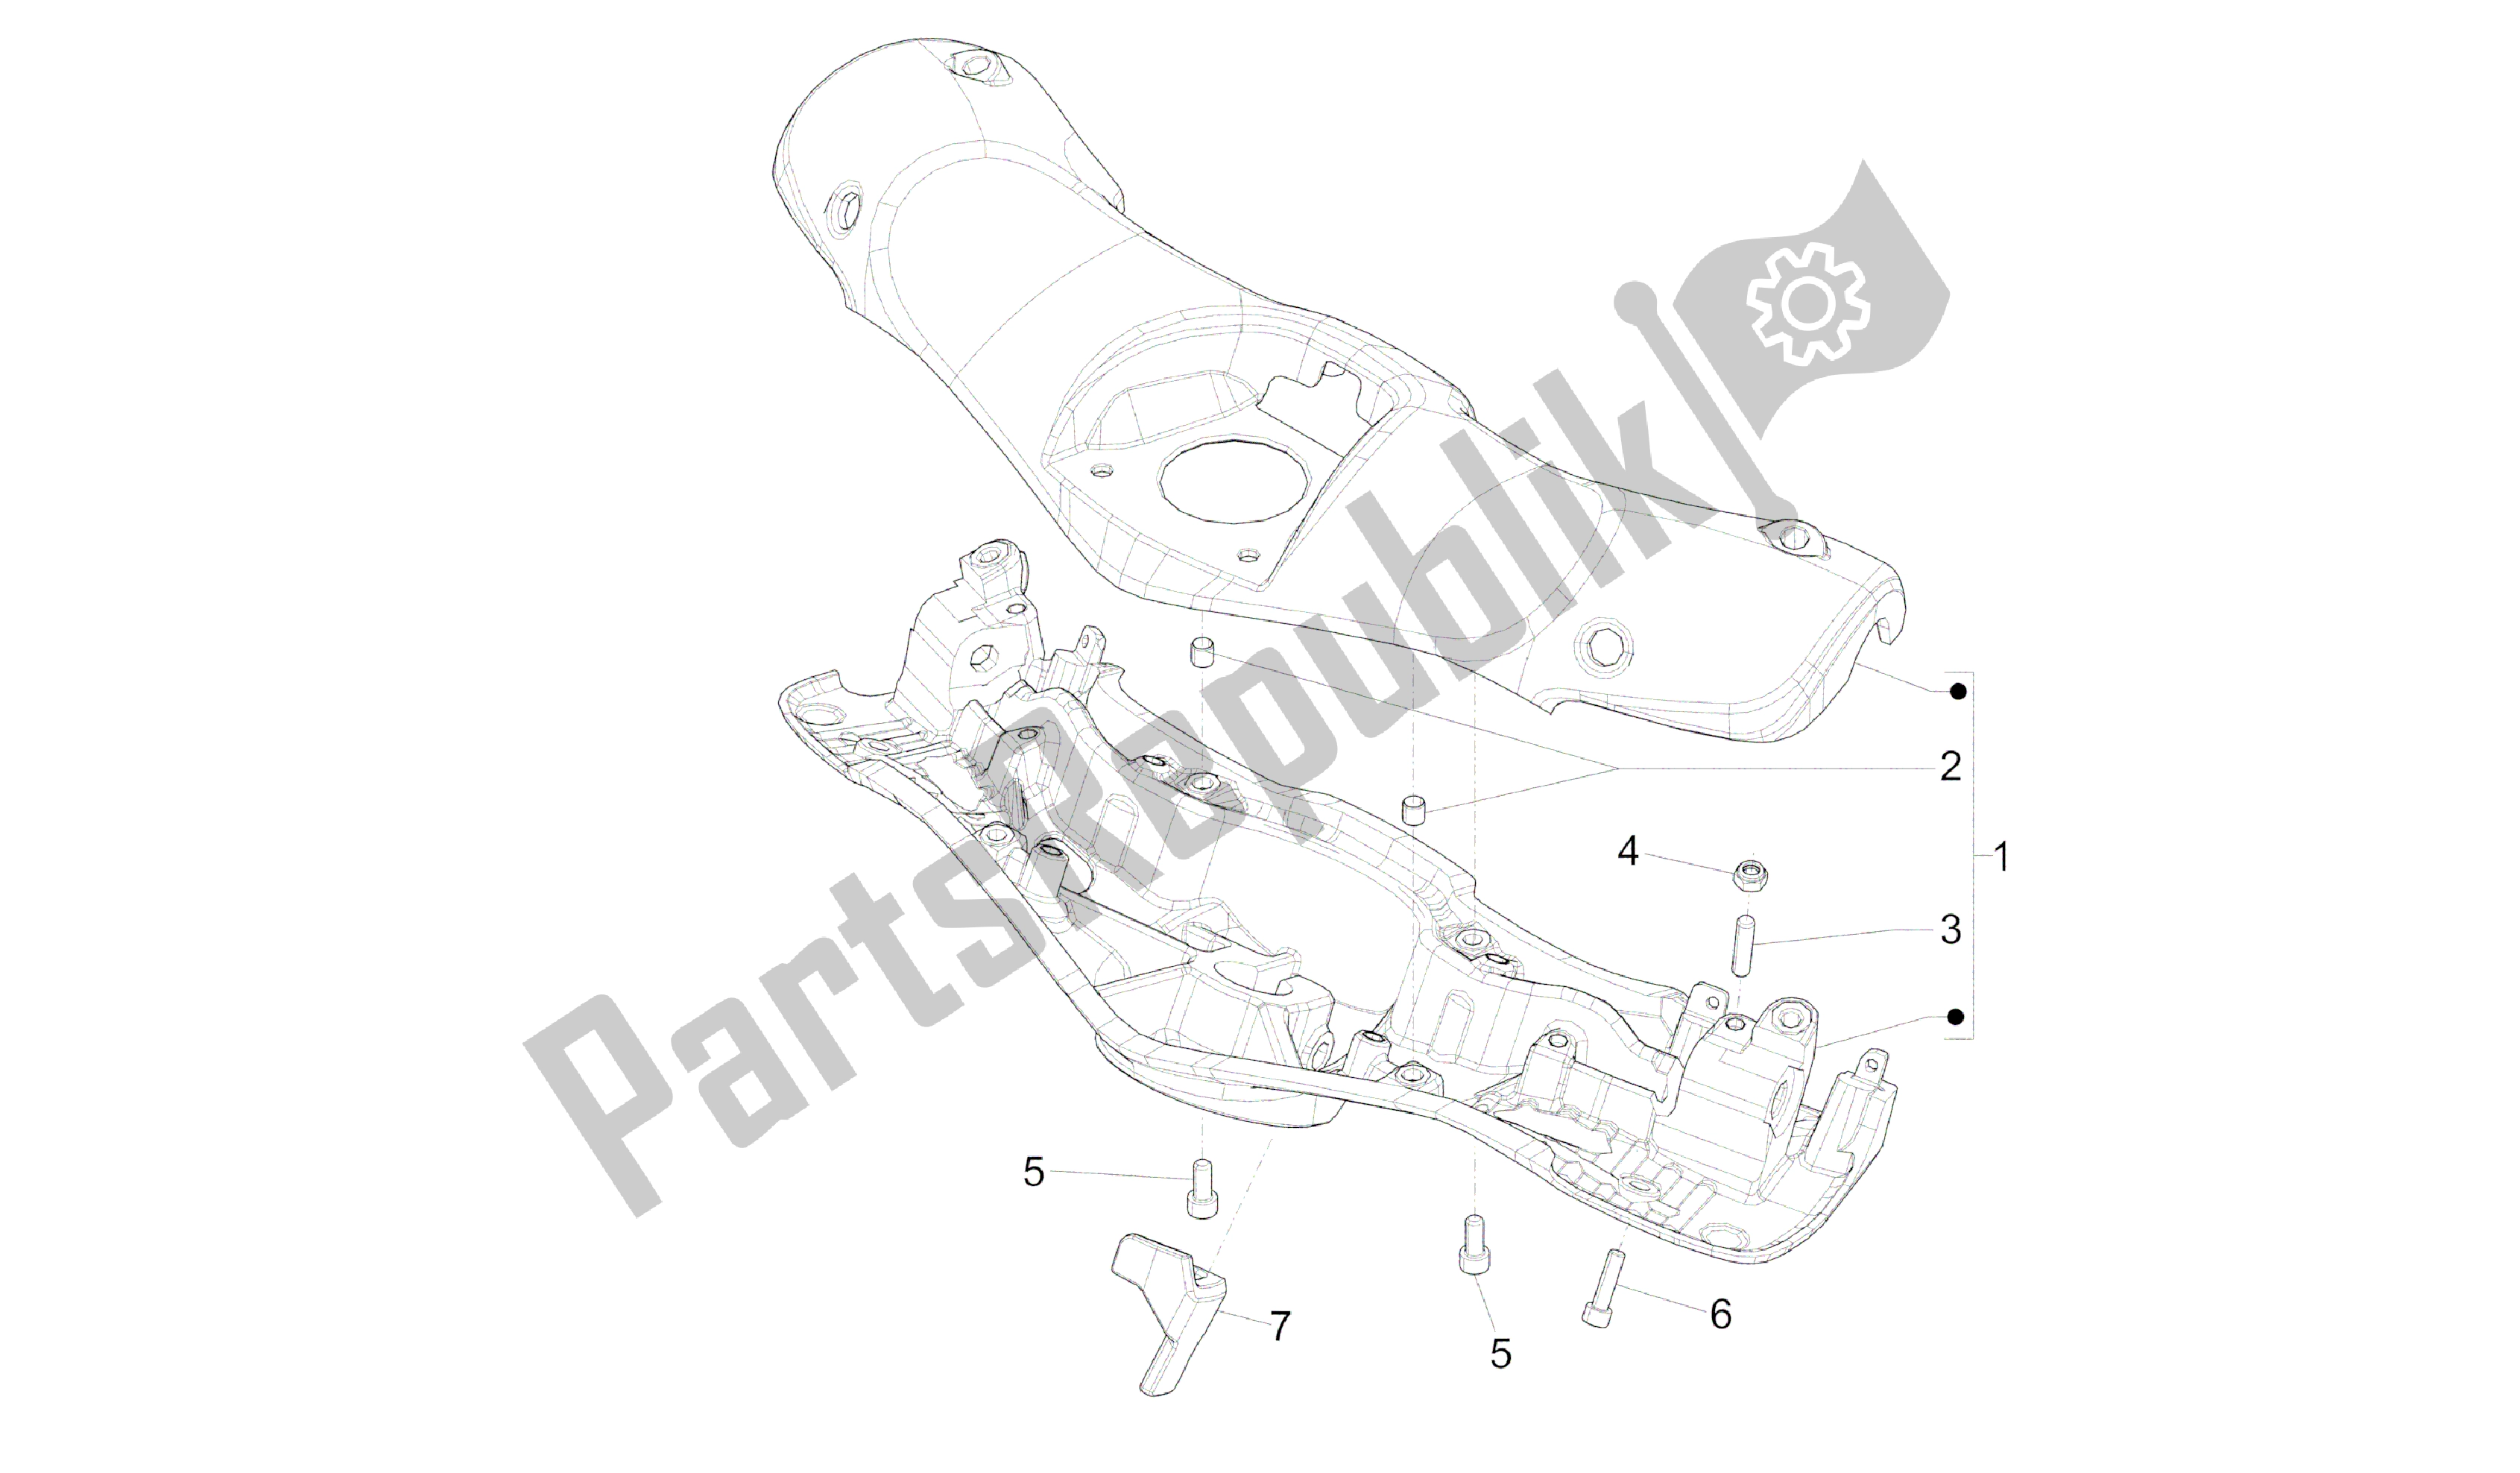 All parts for the Handlebars Coverages of the Vespa 946 150 2013 - 2014